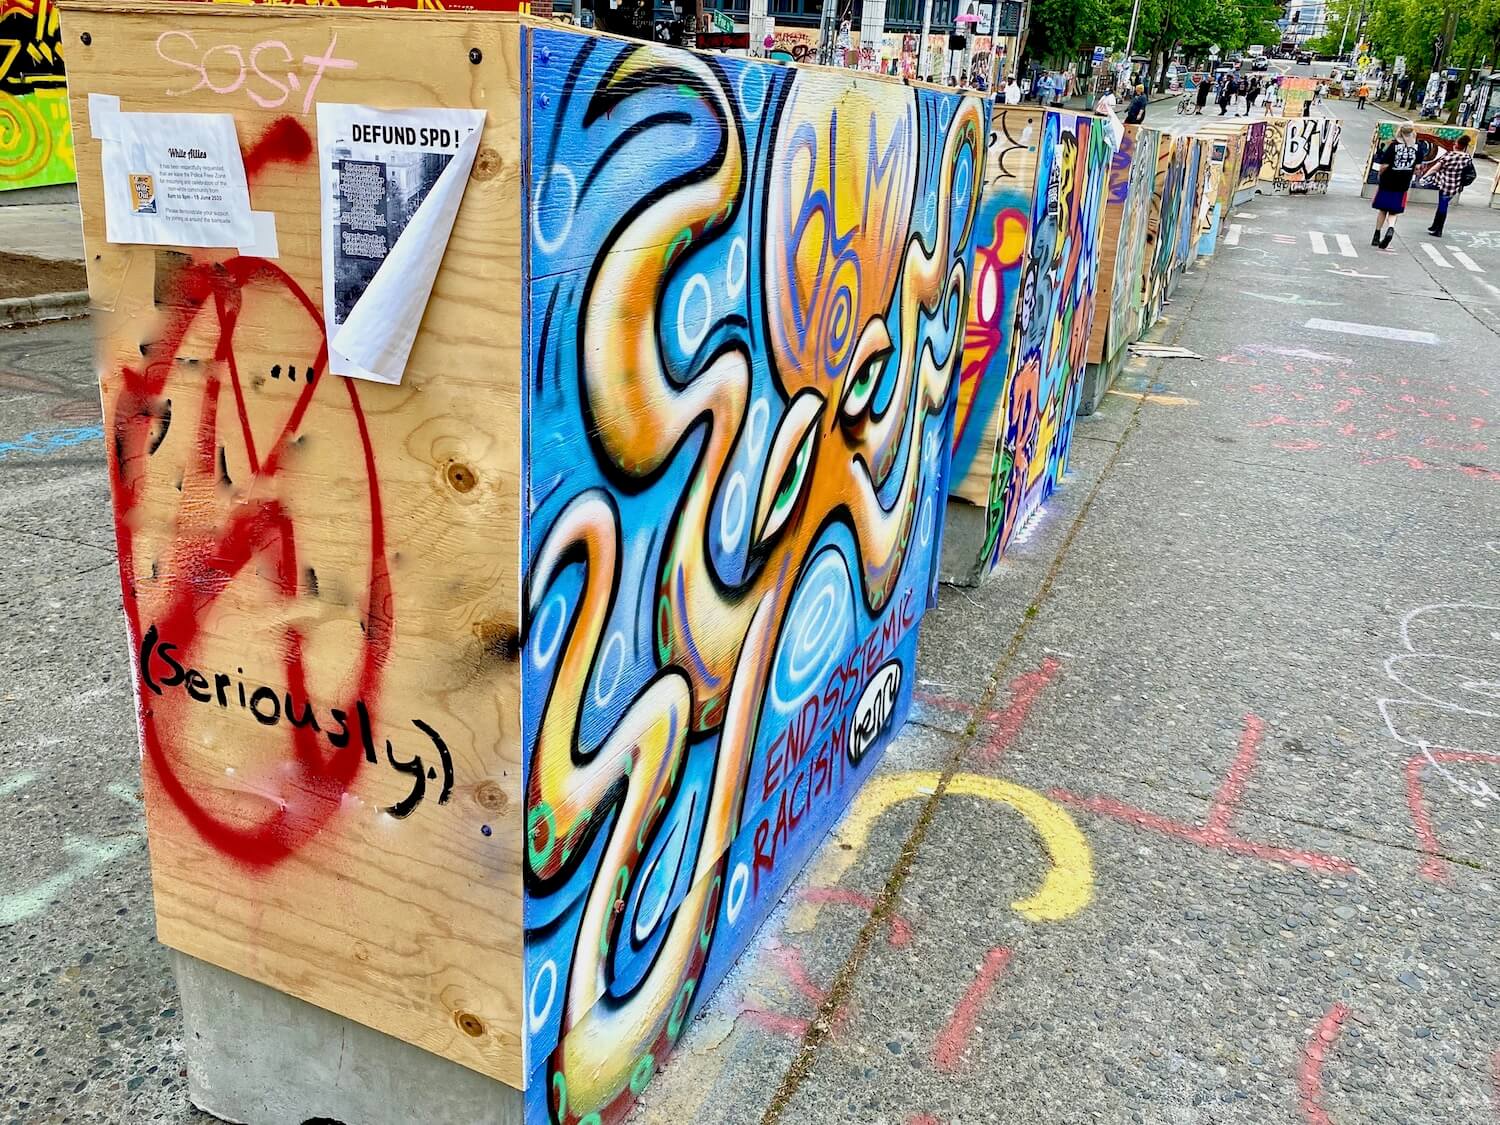 A row of concrete traffic barricades are covered in plywood and painted with a variety of messages. This is in the Black Lives Matter protest area of Capitol Hill in Seattle.